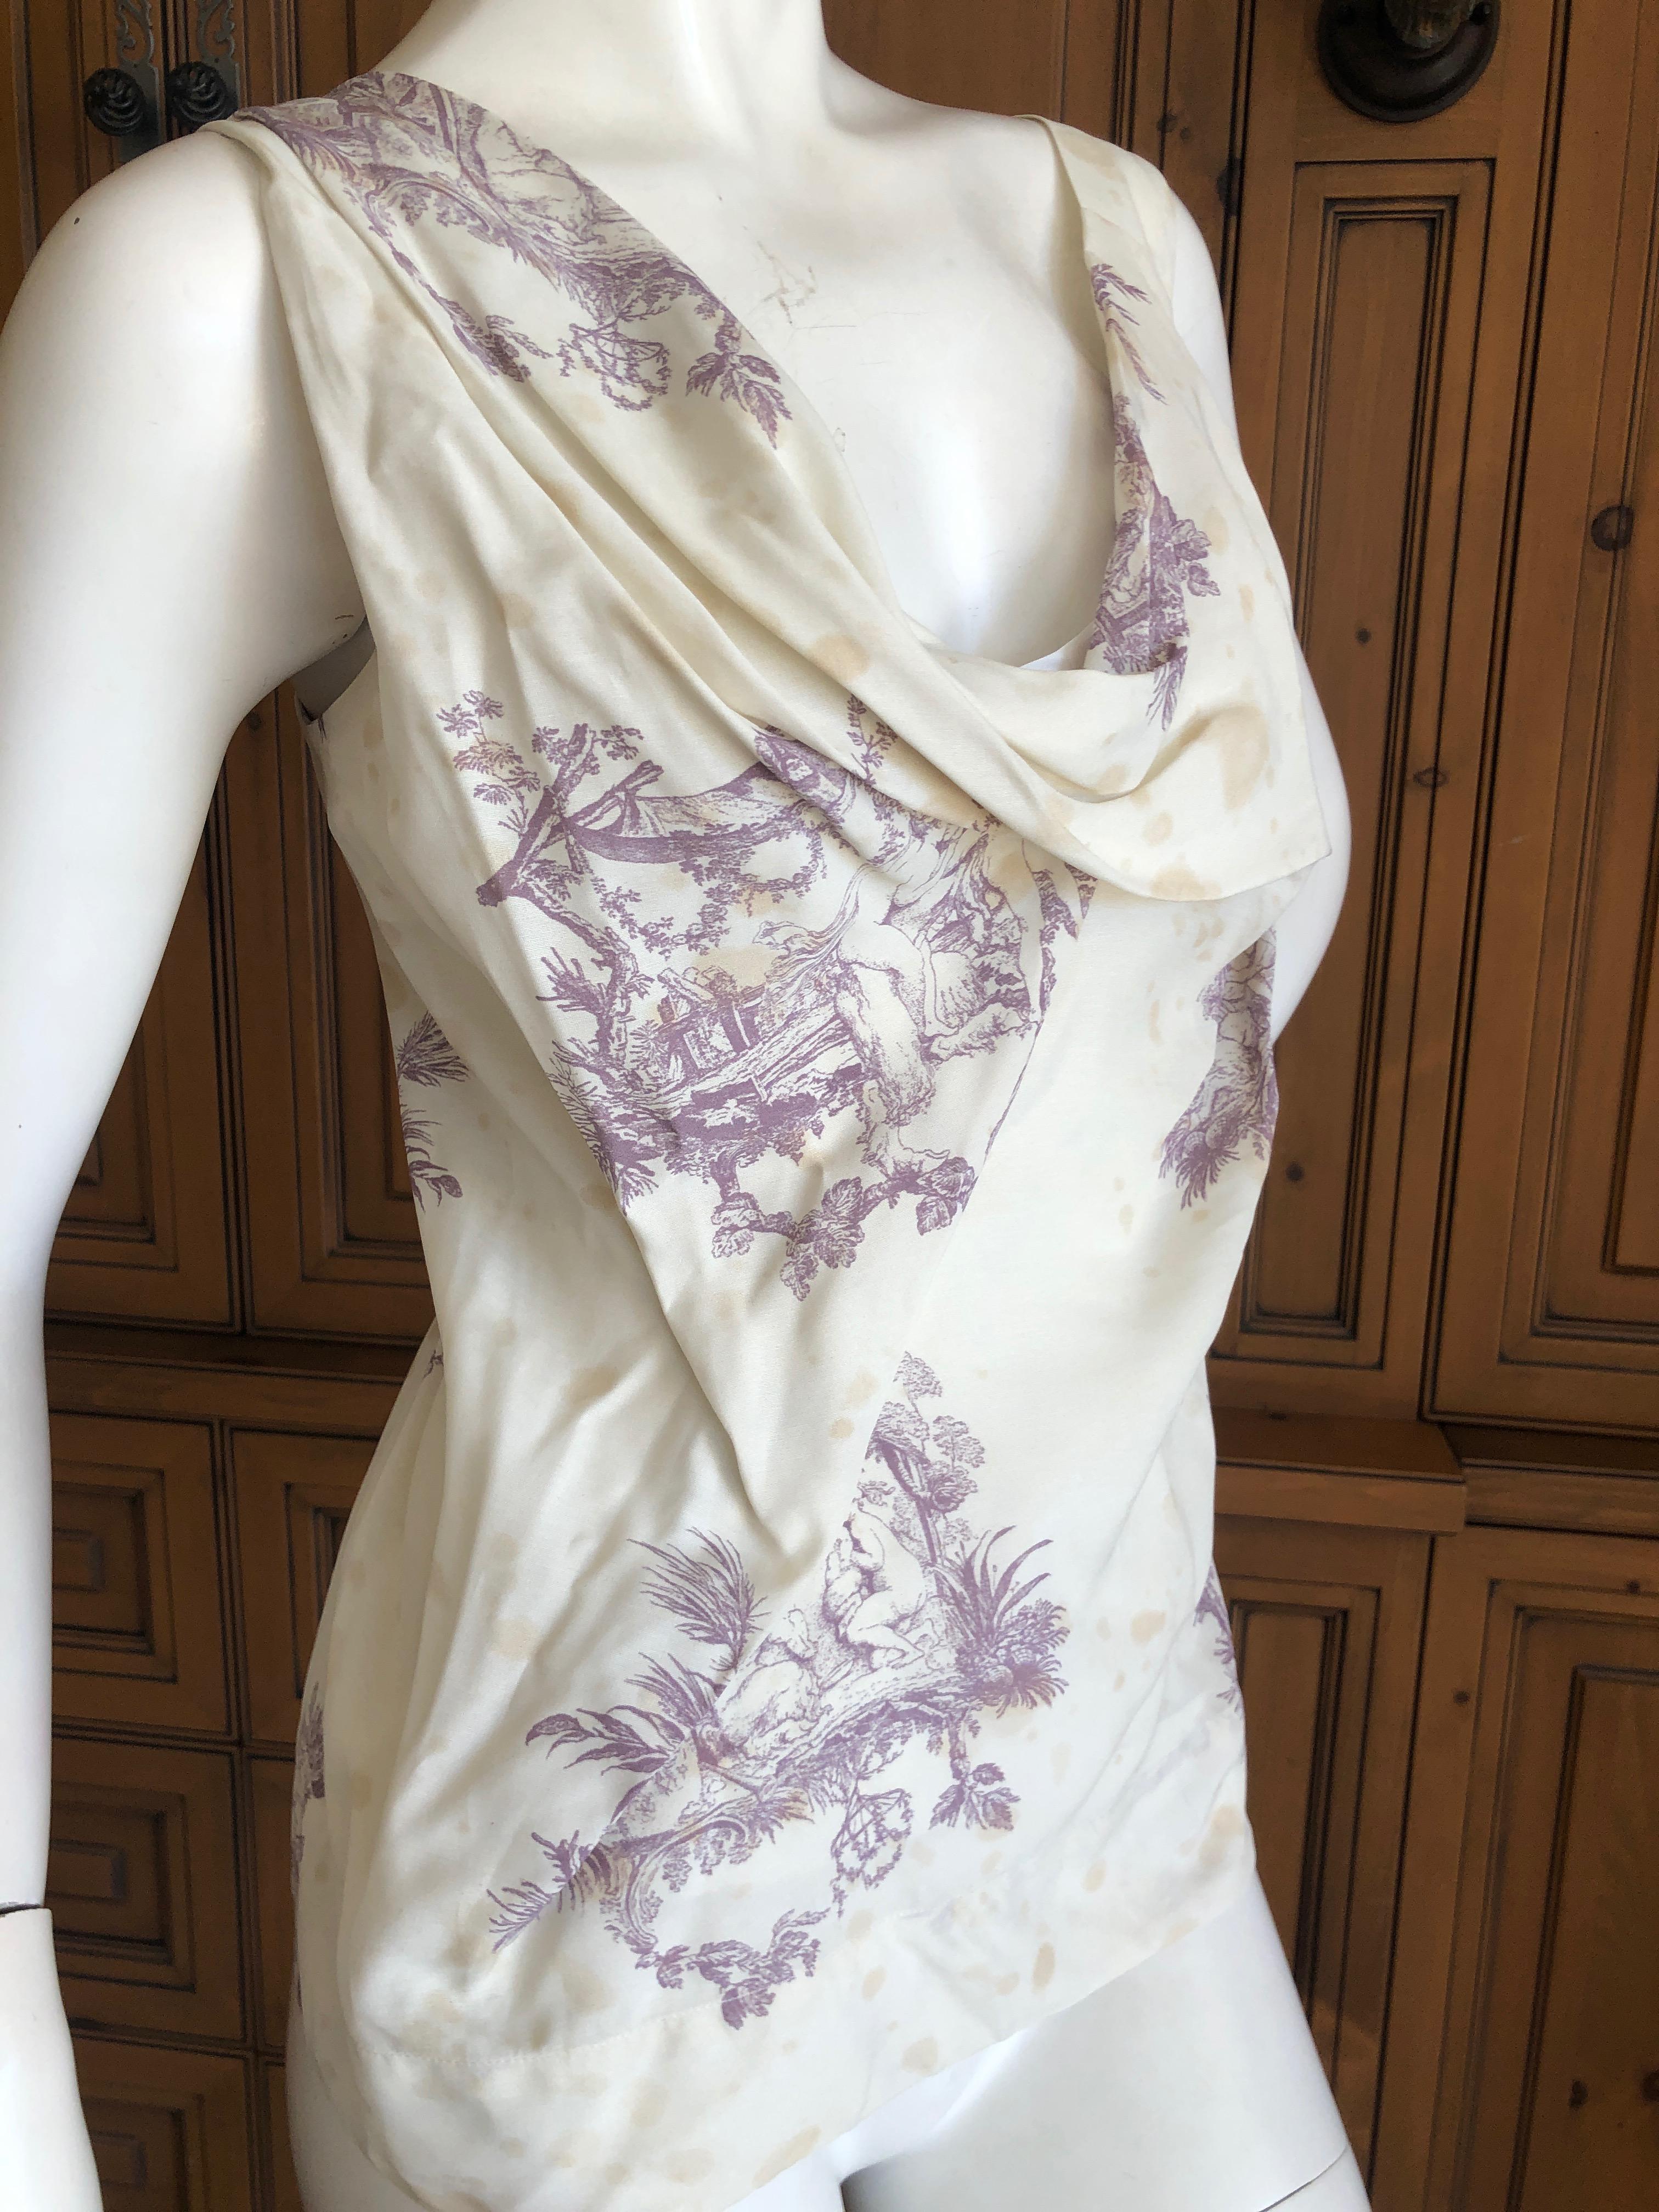 Vivienne Westwood Vintage Red Label Toile de Joie Print Top
SO pretty
Size 40 UK
There is a lot of stretch in this fabric.
Bust 38